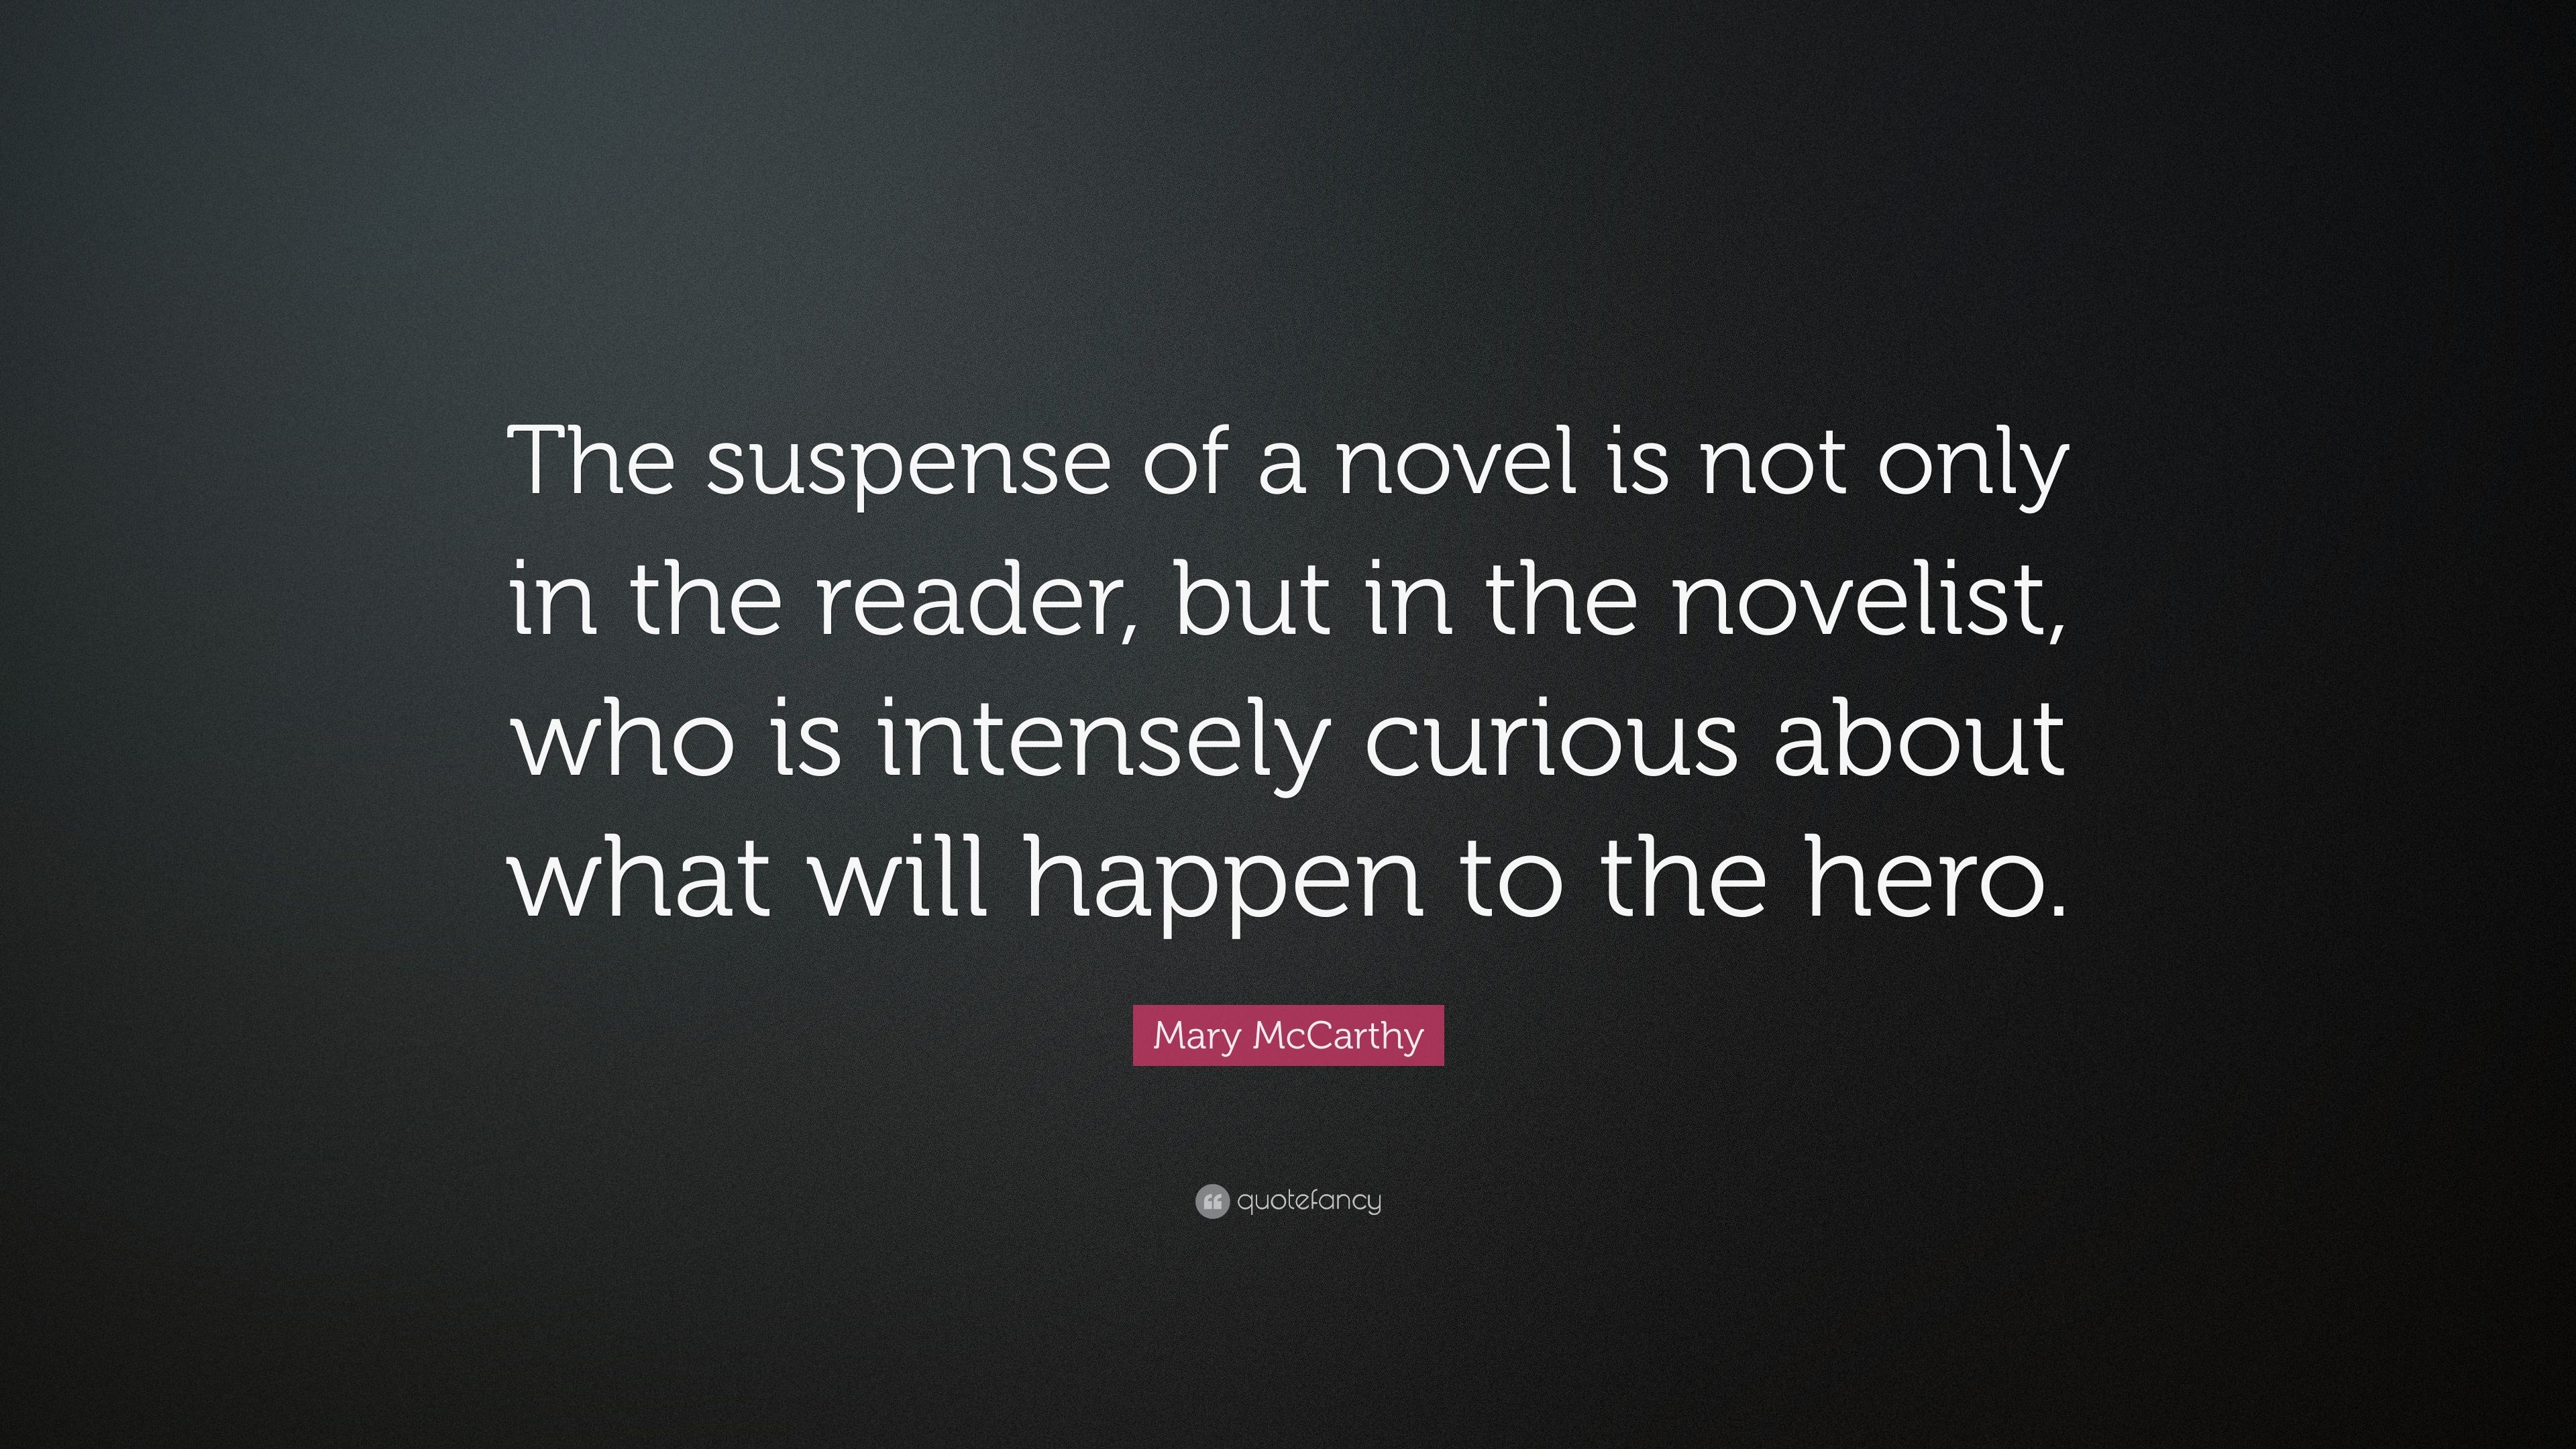 Mary McCarthy Quote: “The suspense of a .quotefancy.com